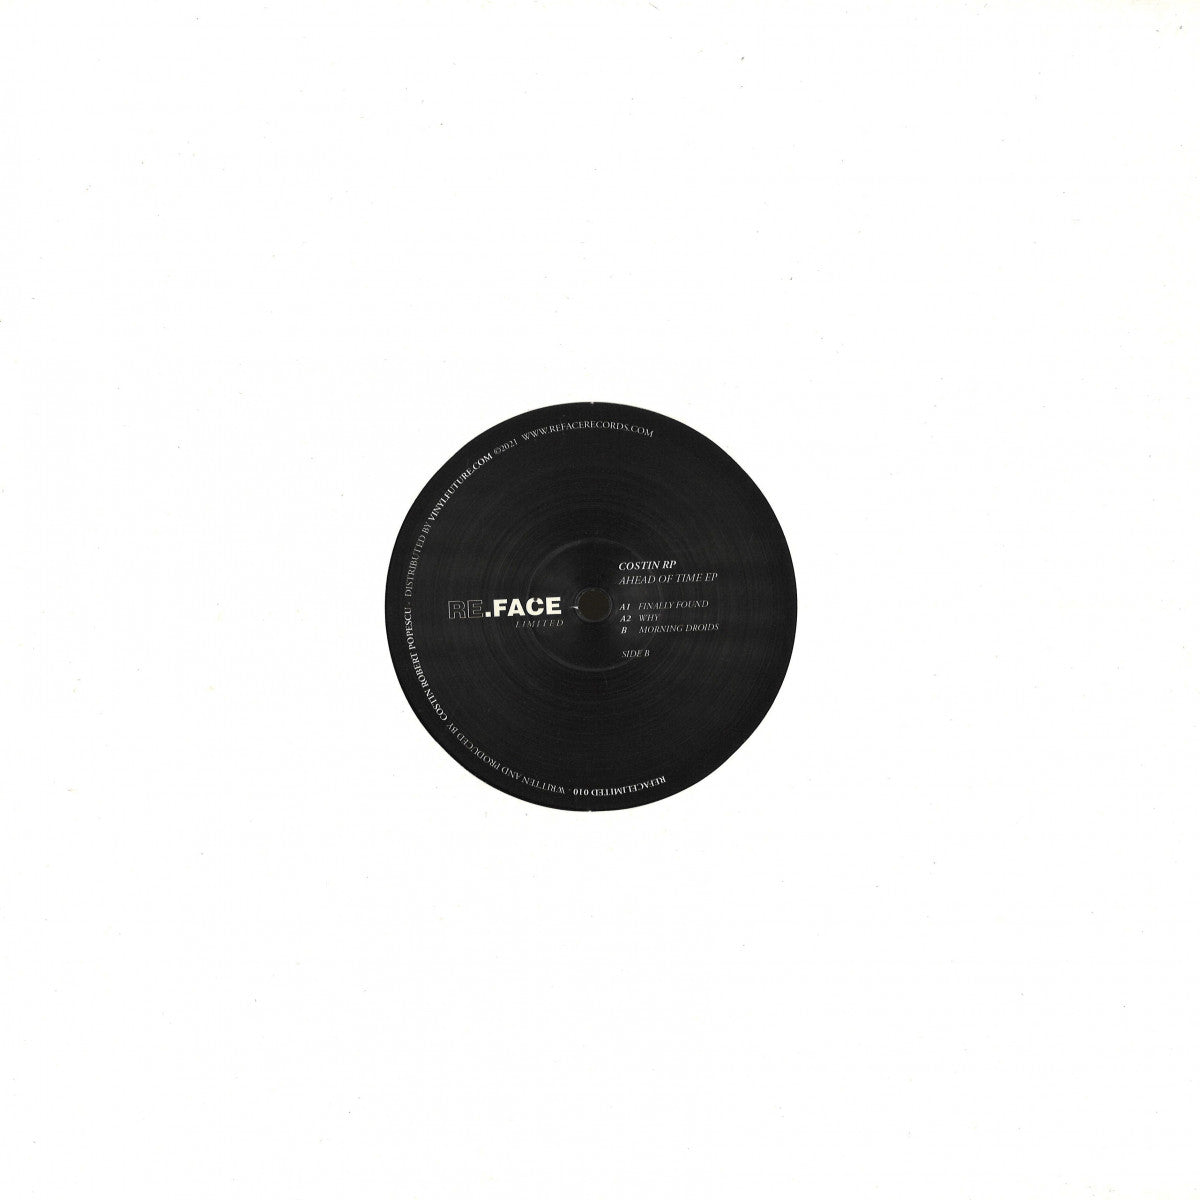 Costin Rp - Ahead Of Time Ep (Re.Face Limited) (M)